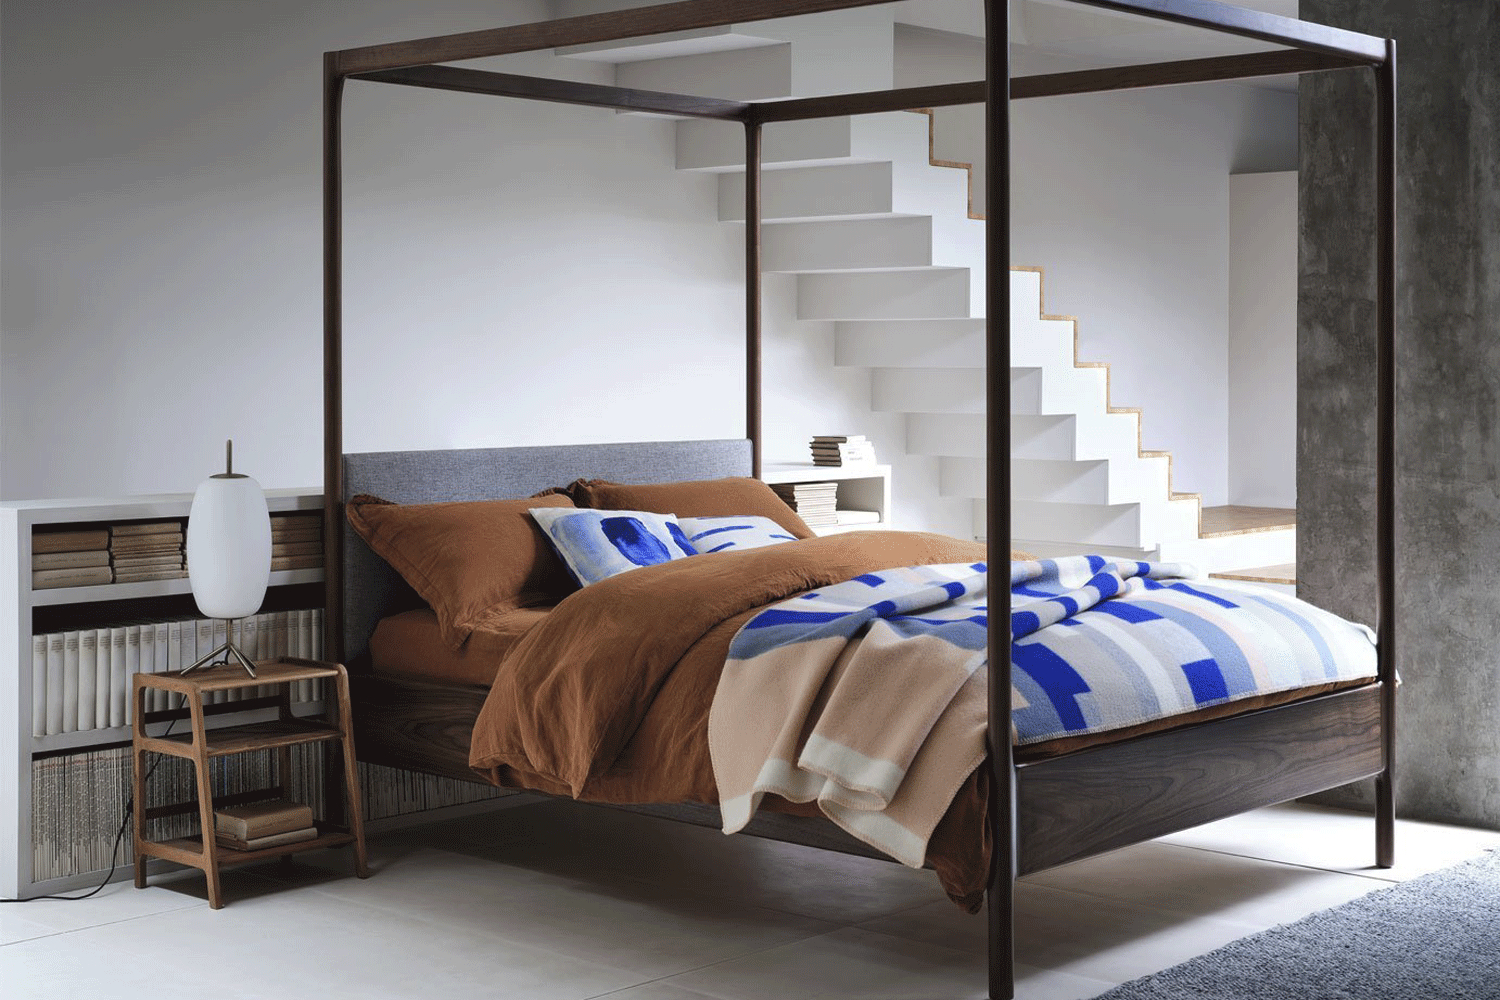 Best Four Poster Bed Ideas 12 Stylish, 4 Poster King Bed Frame